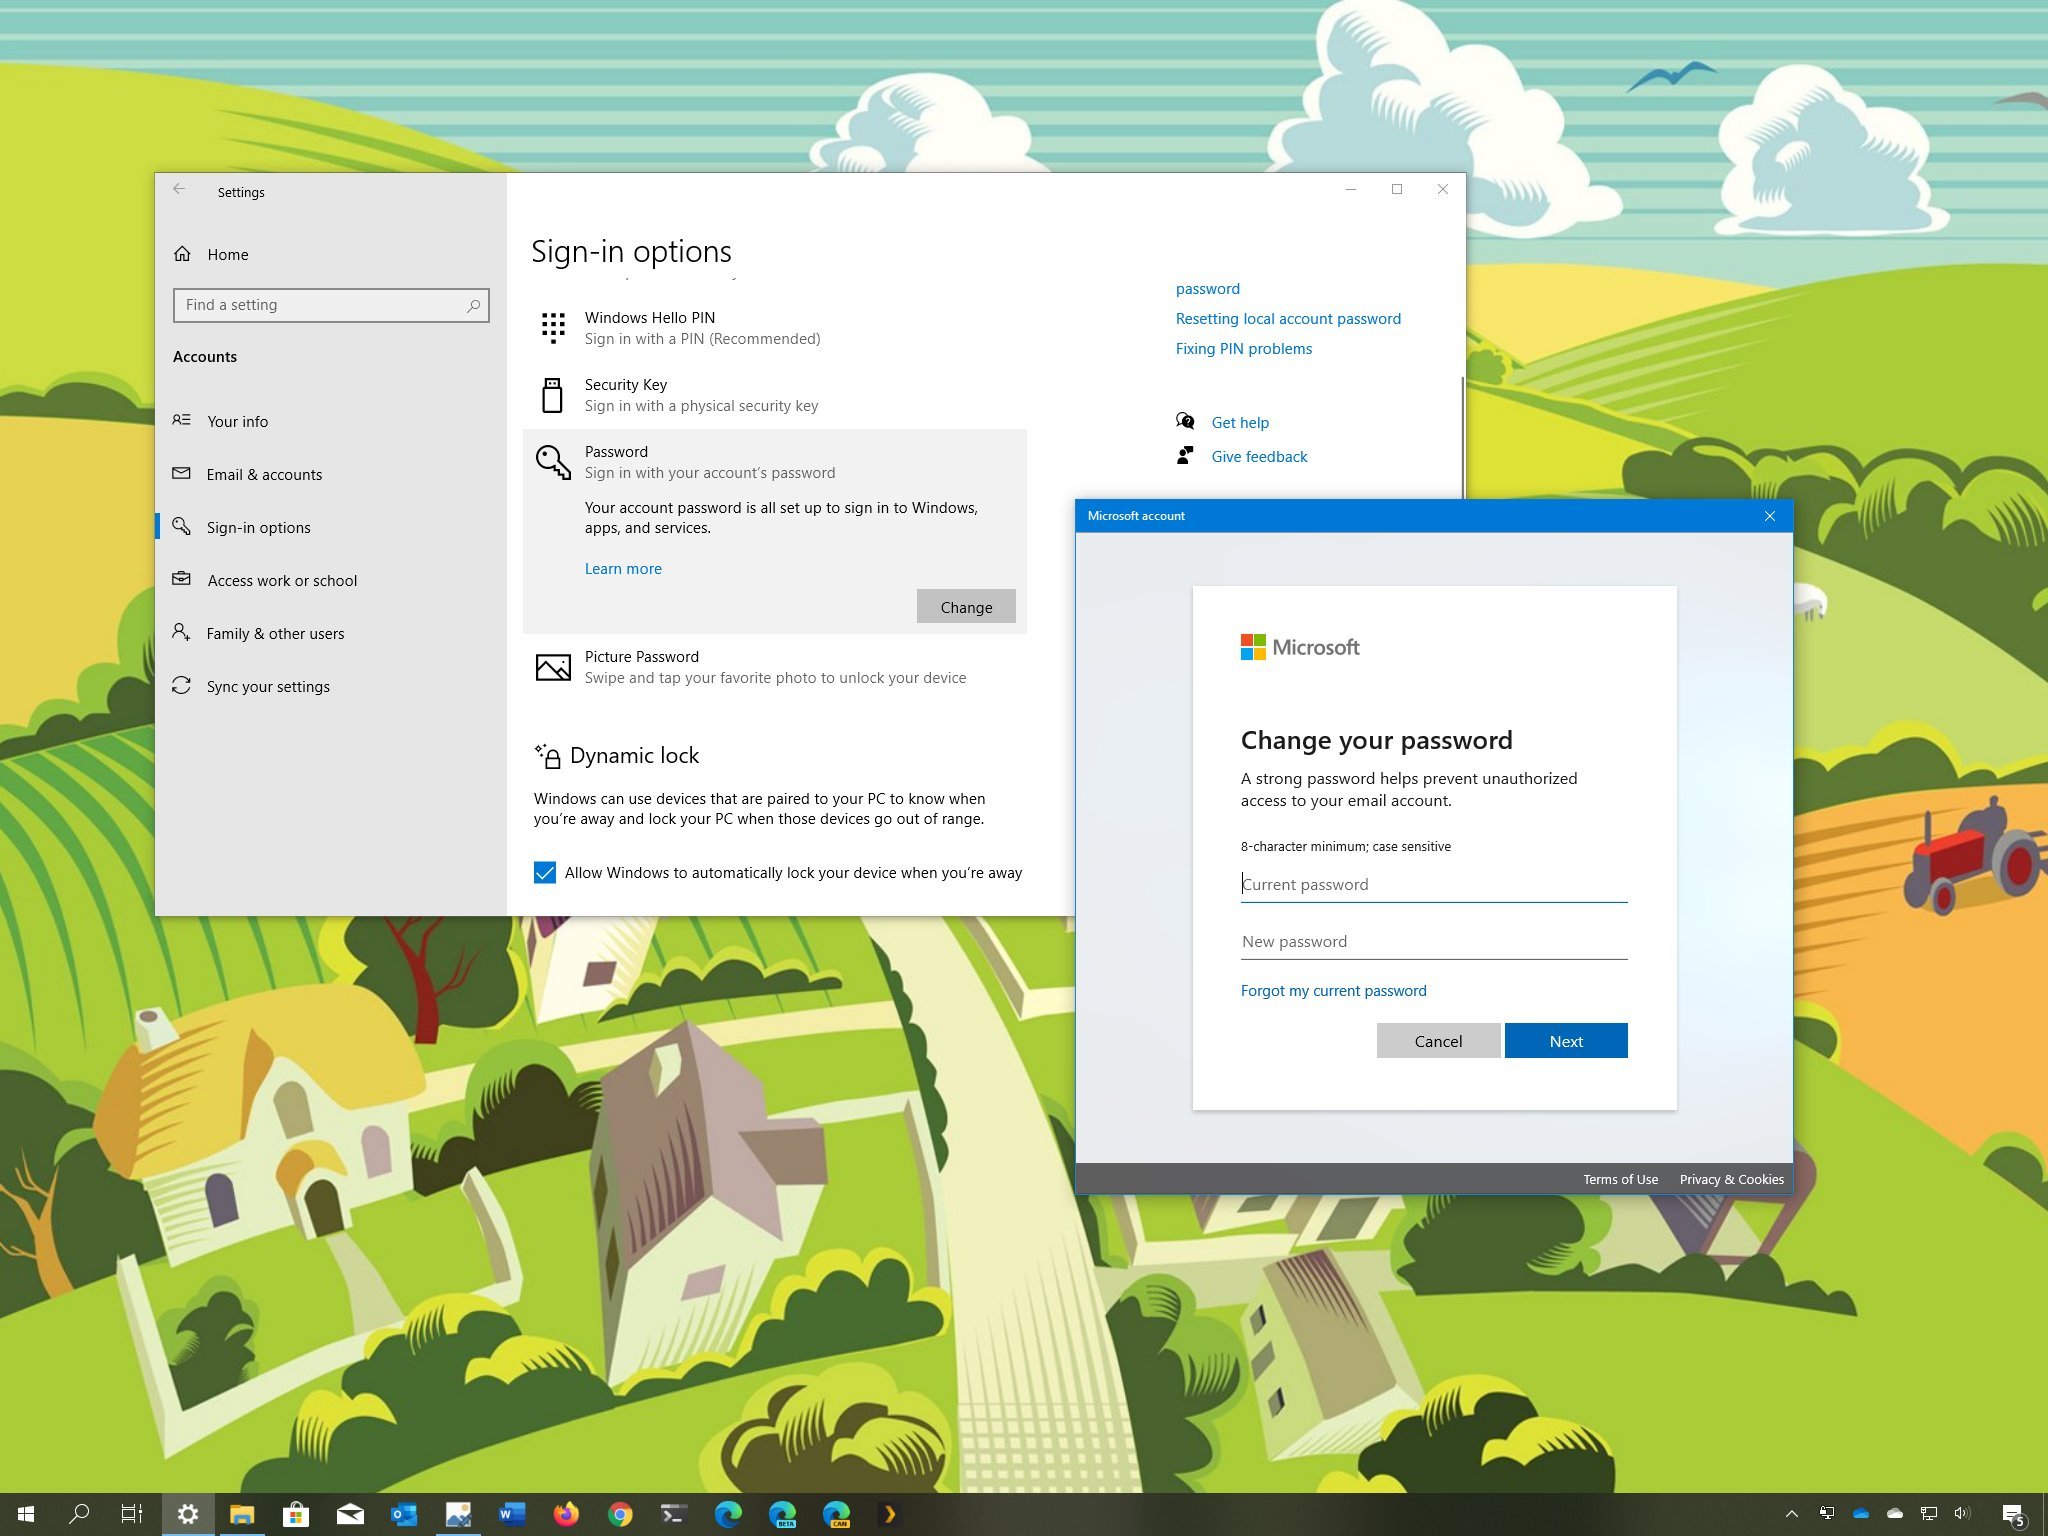 Your current password. Windows 10 change password. Change password Window. Sign-in options password Pin. How to change avatar on Windows 10 accaunt.